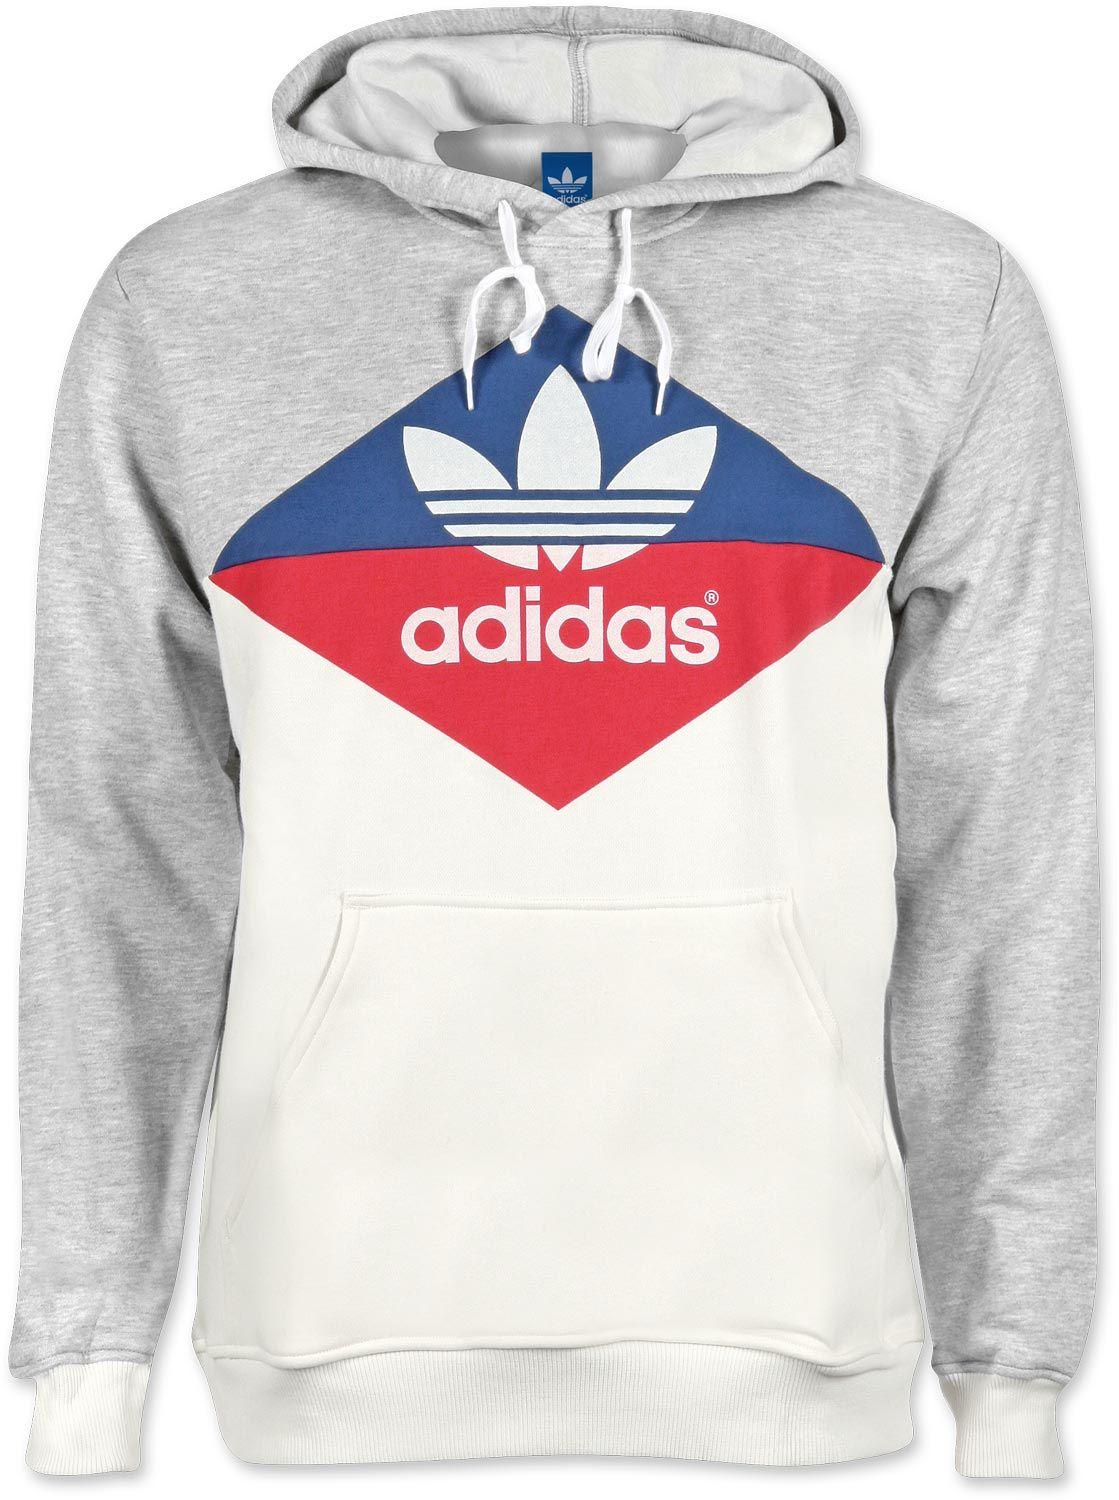 Blue and Red Adidas Logo - adidas Logo hoodie white blue red